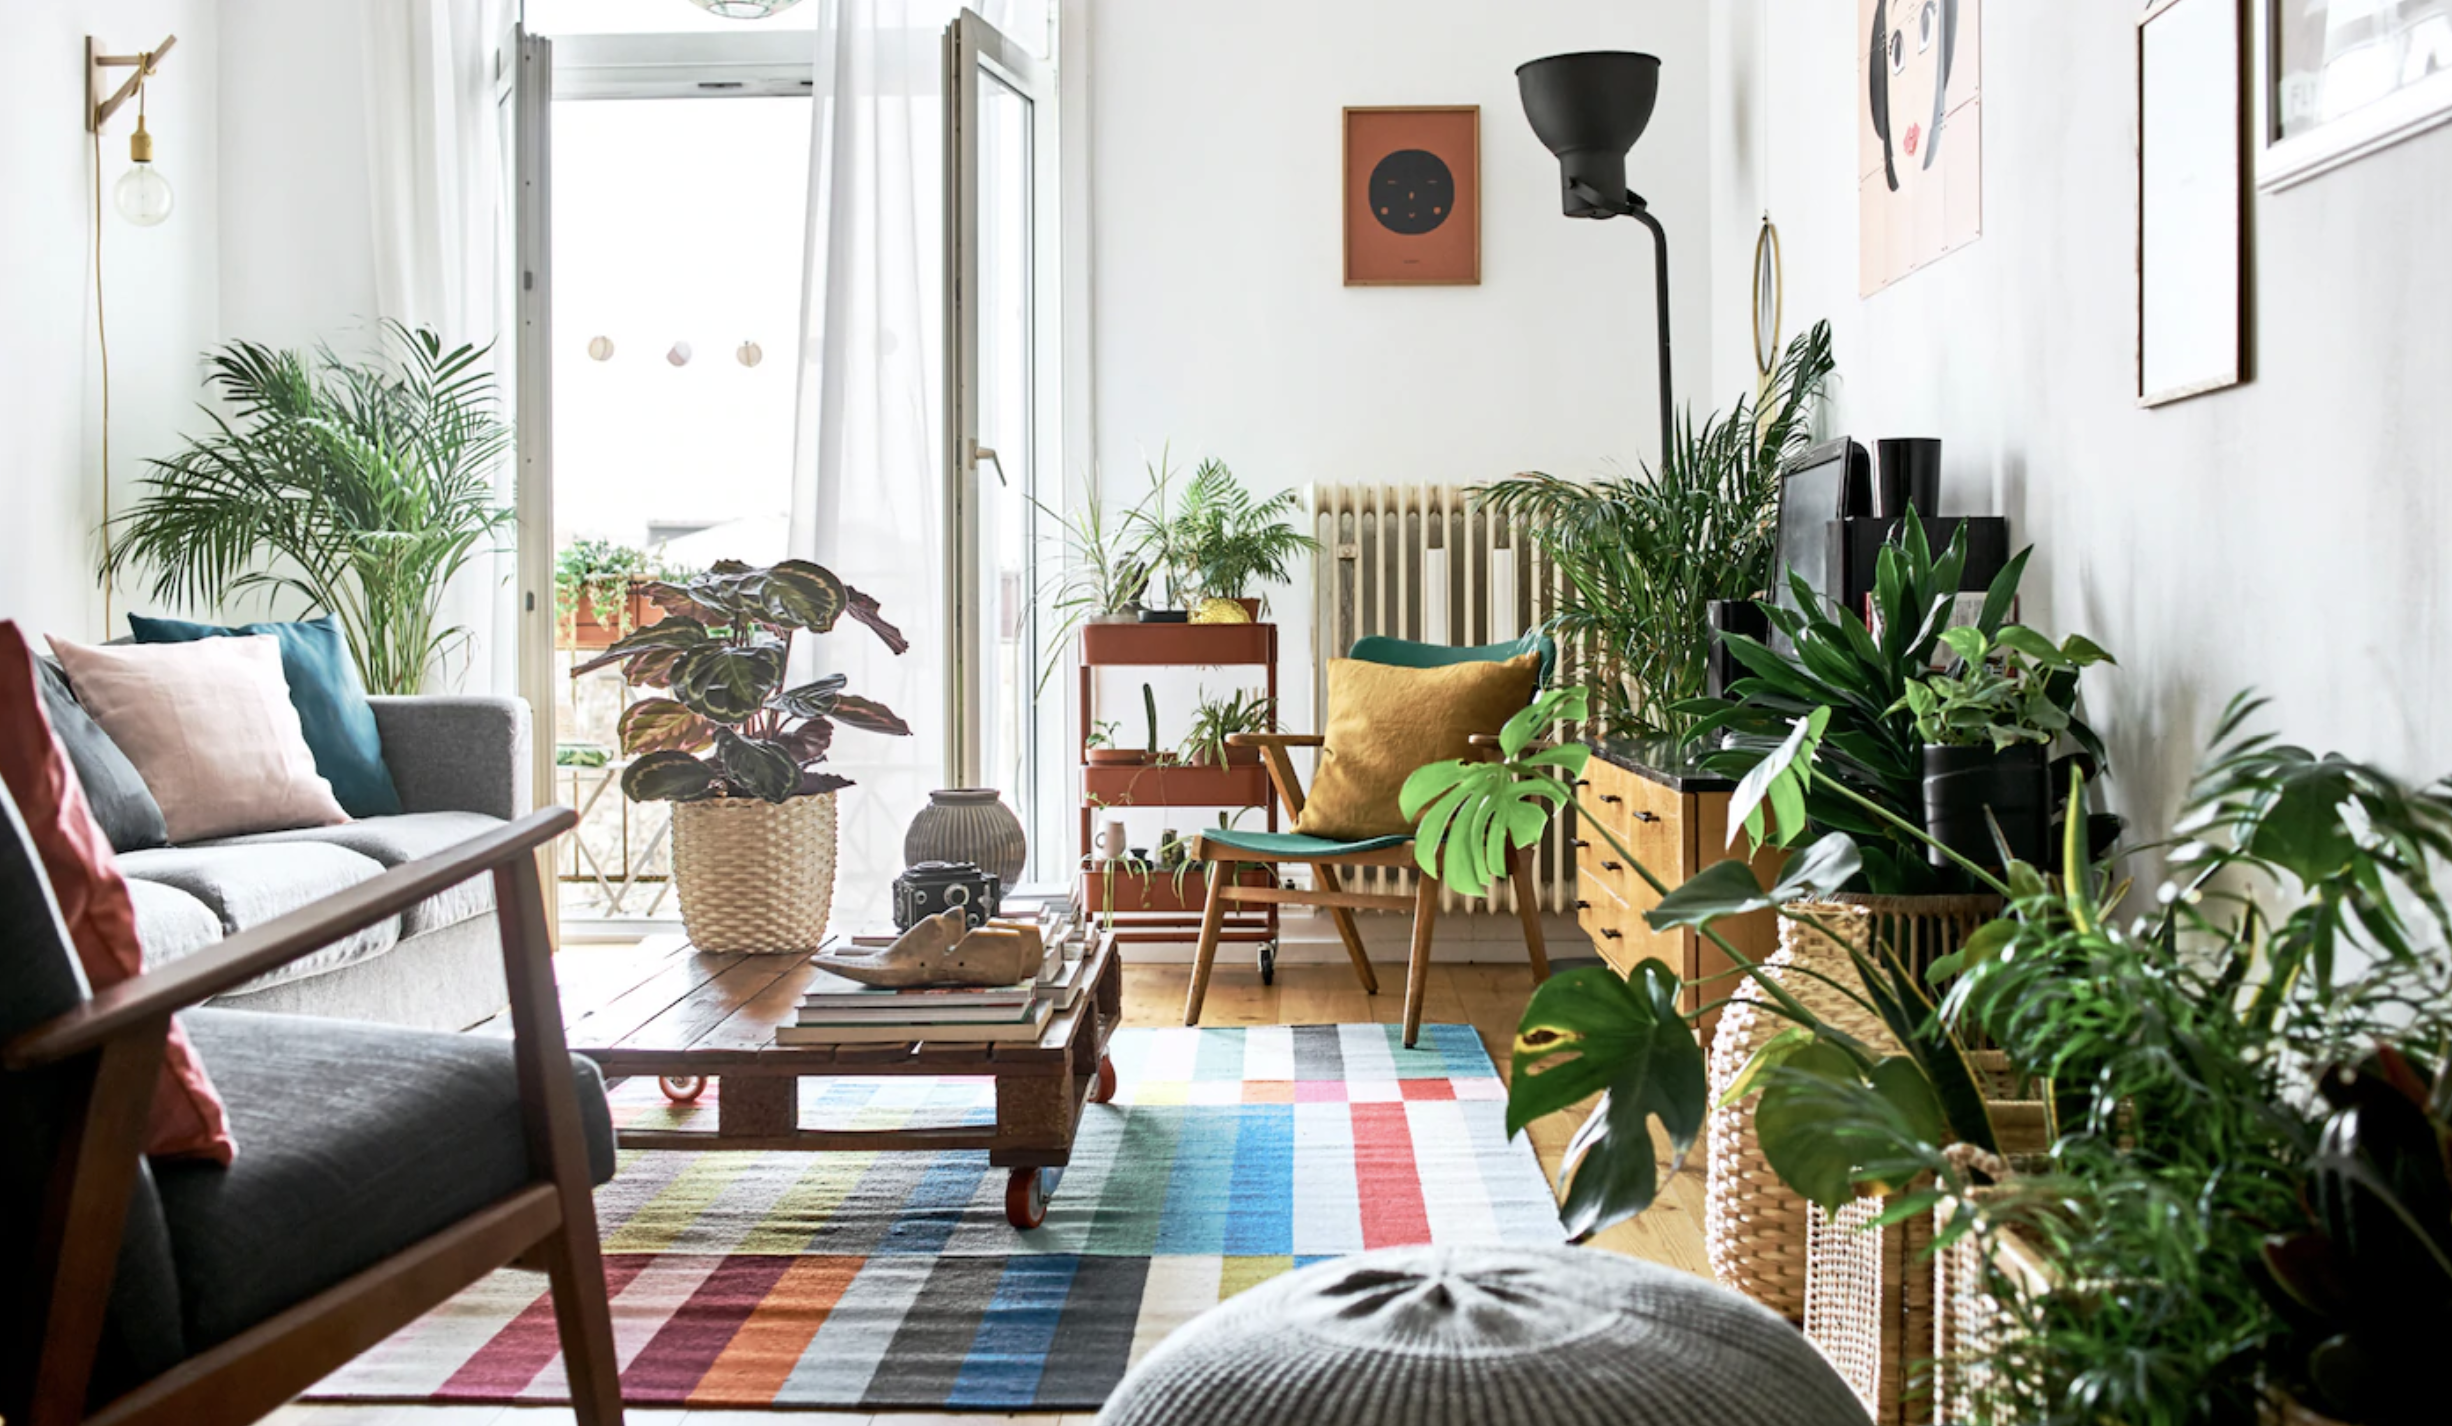 18 living room ideas on a budget to update your space for less ...